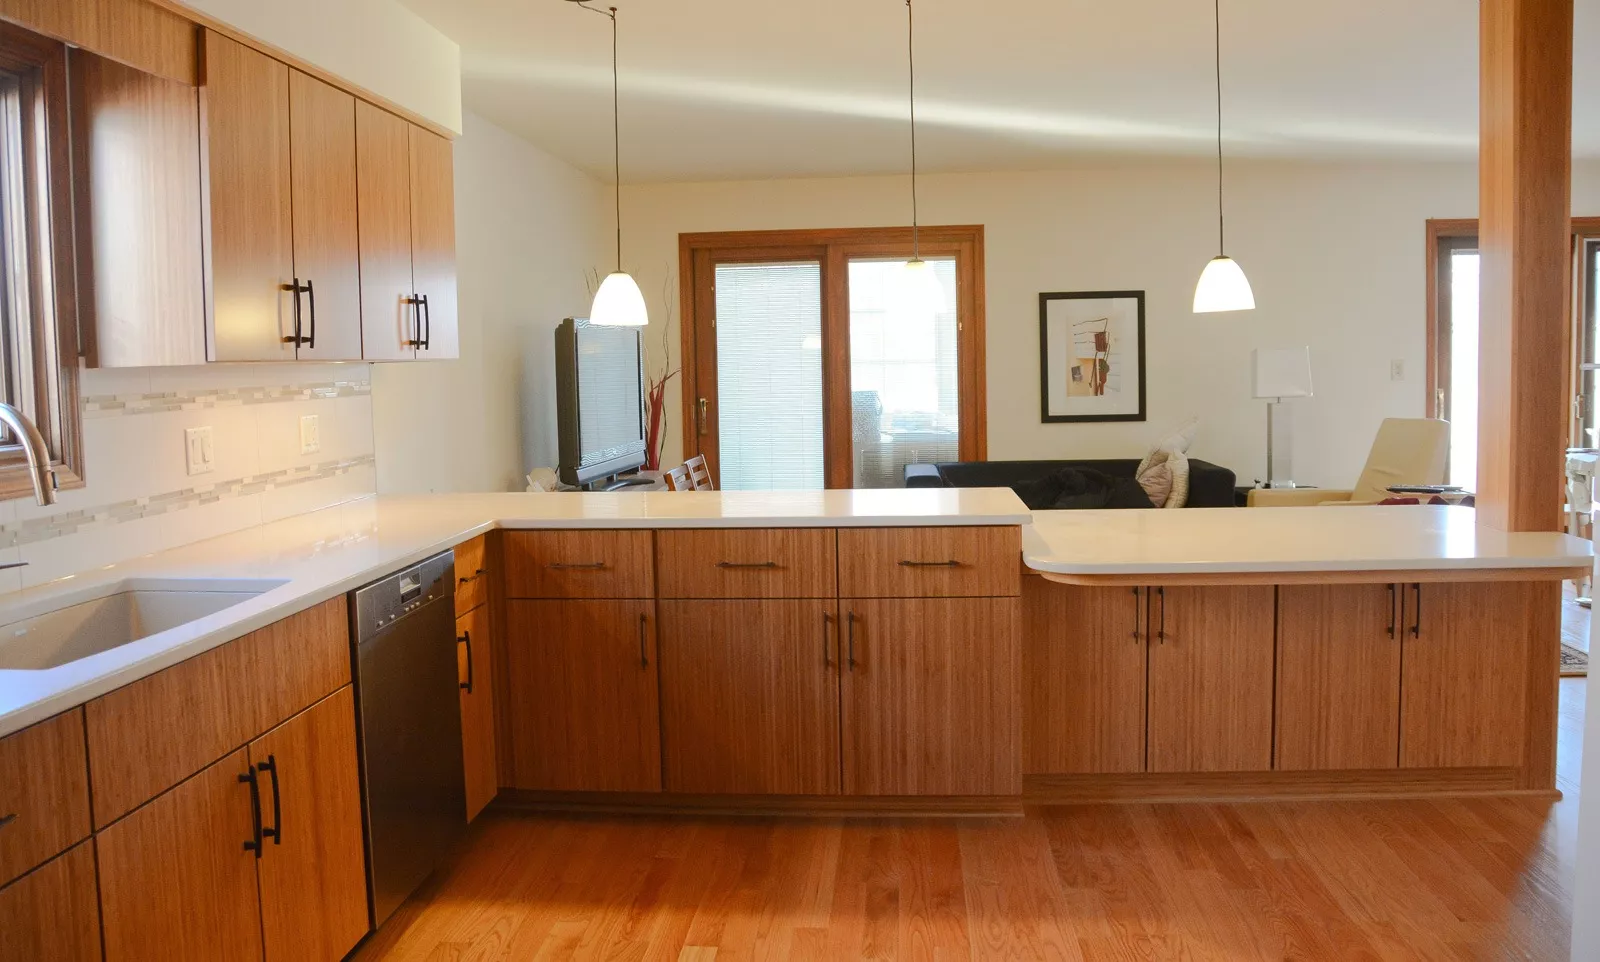 Kitchen remodeling in Naperville, IL. Book matched doors & drawers provide a luxurious look.